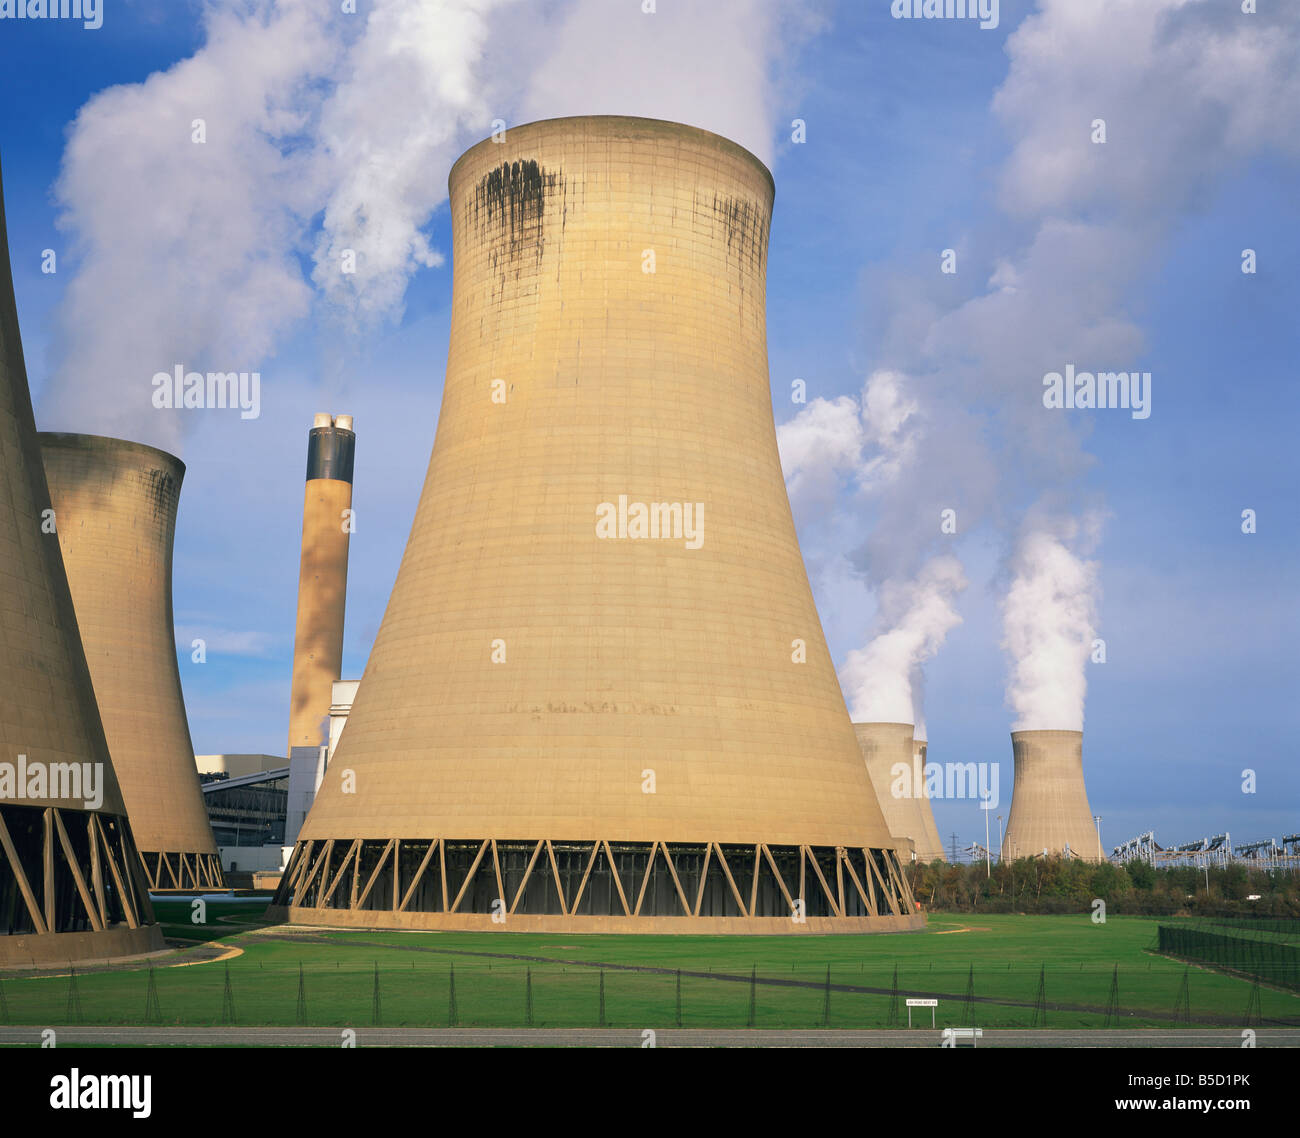 Cooling towers at the Drax Power Station in North Yorkshire England R Rainford Stock Photo